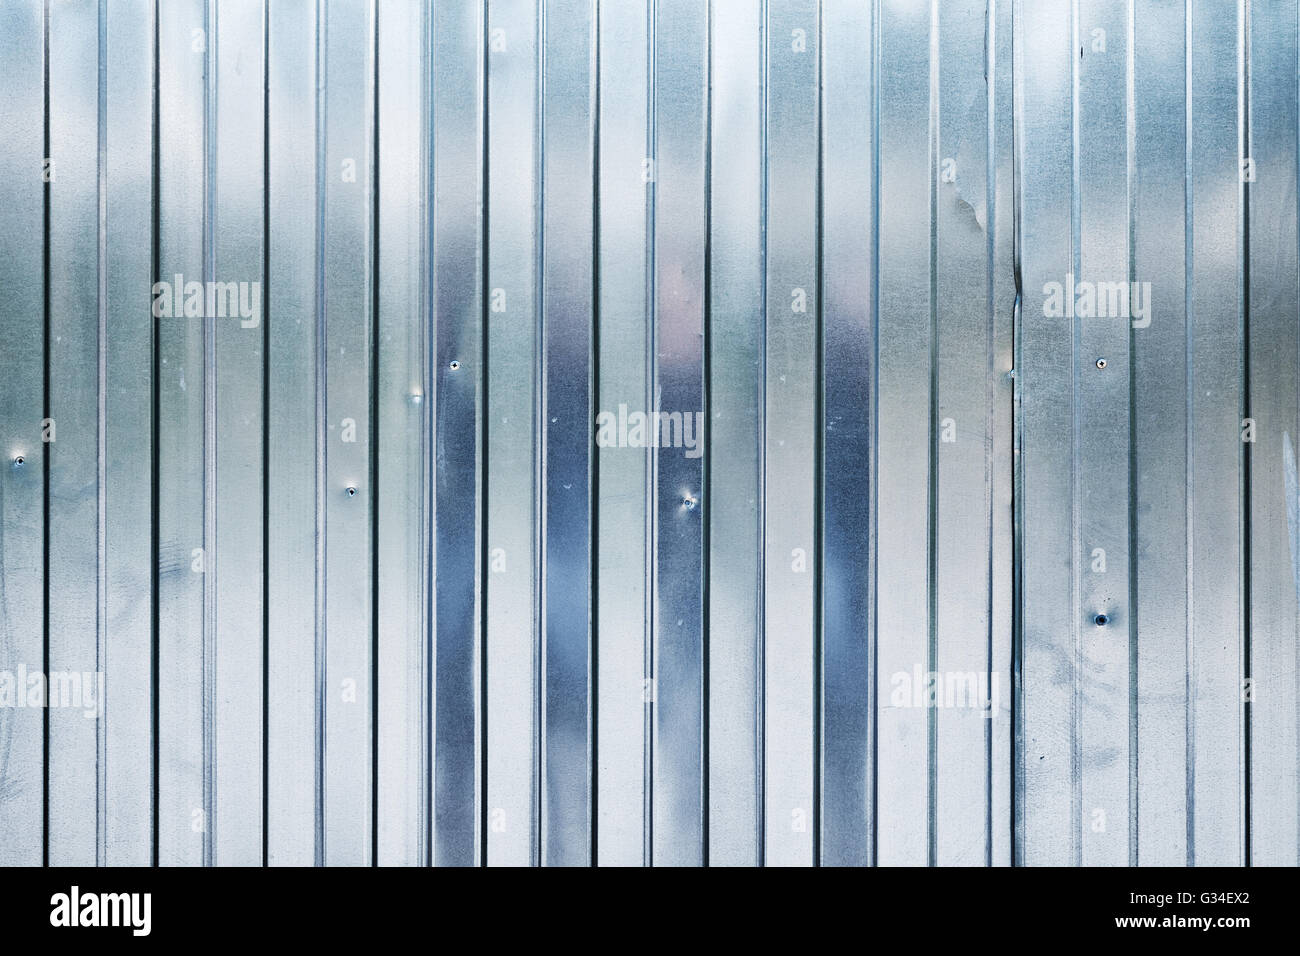 New shining corrugated metal fence, industrial wall background photo texture Stock Photo